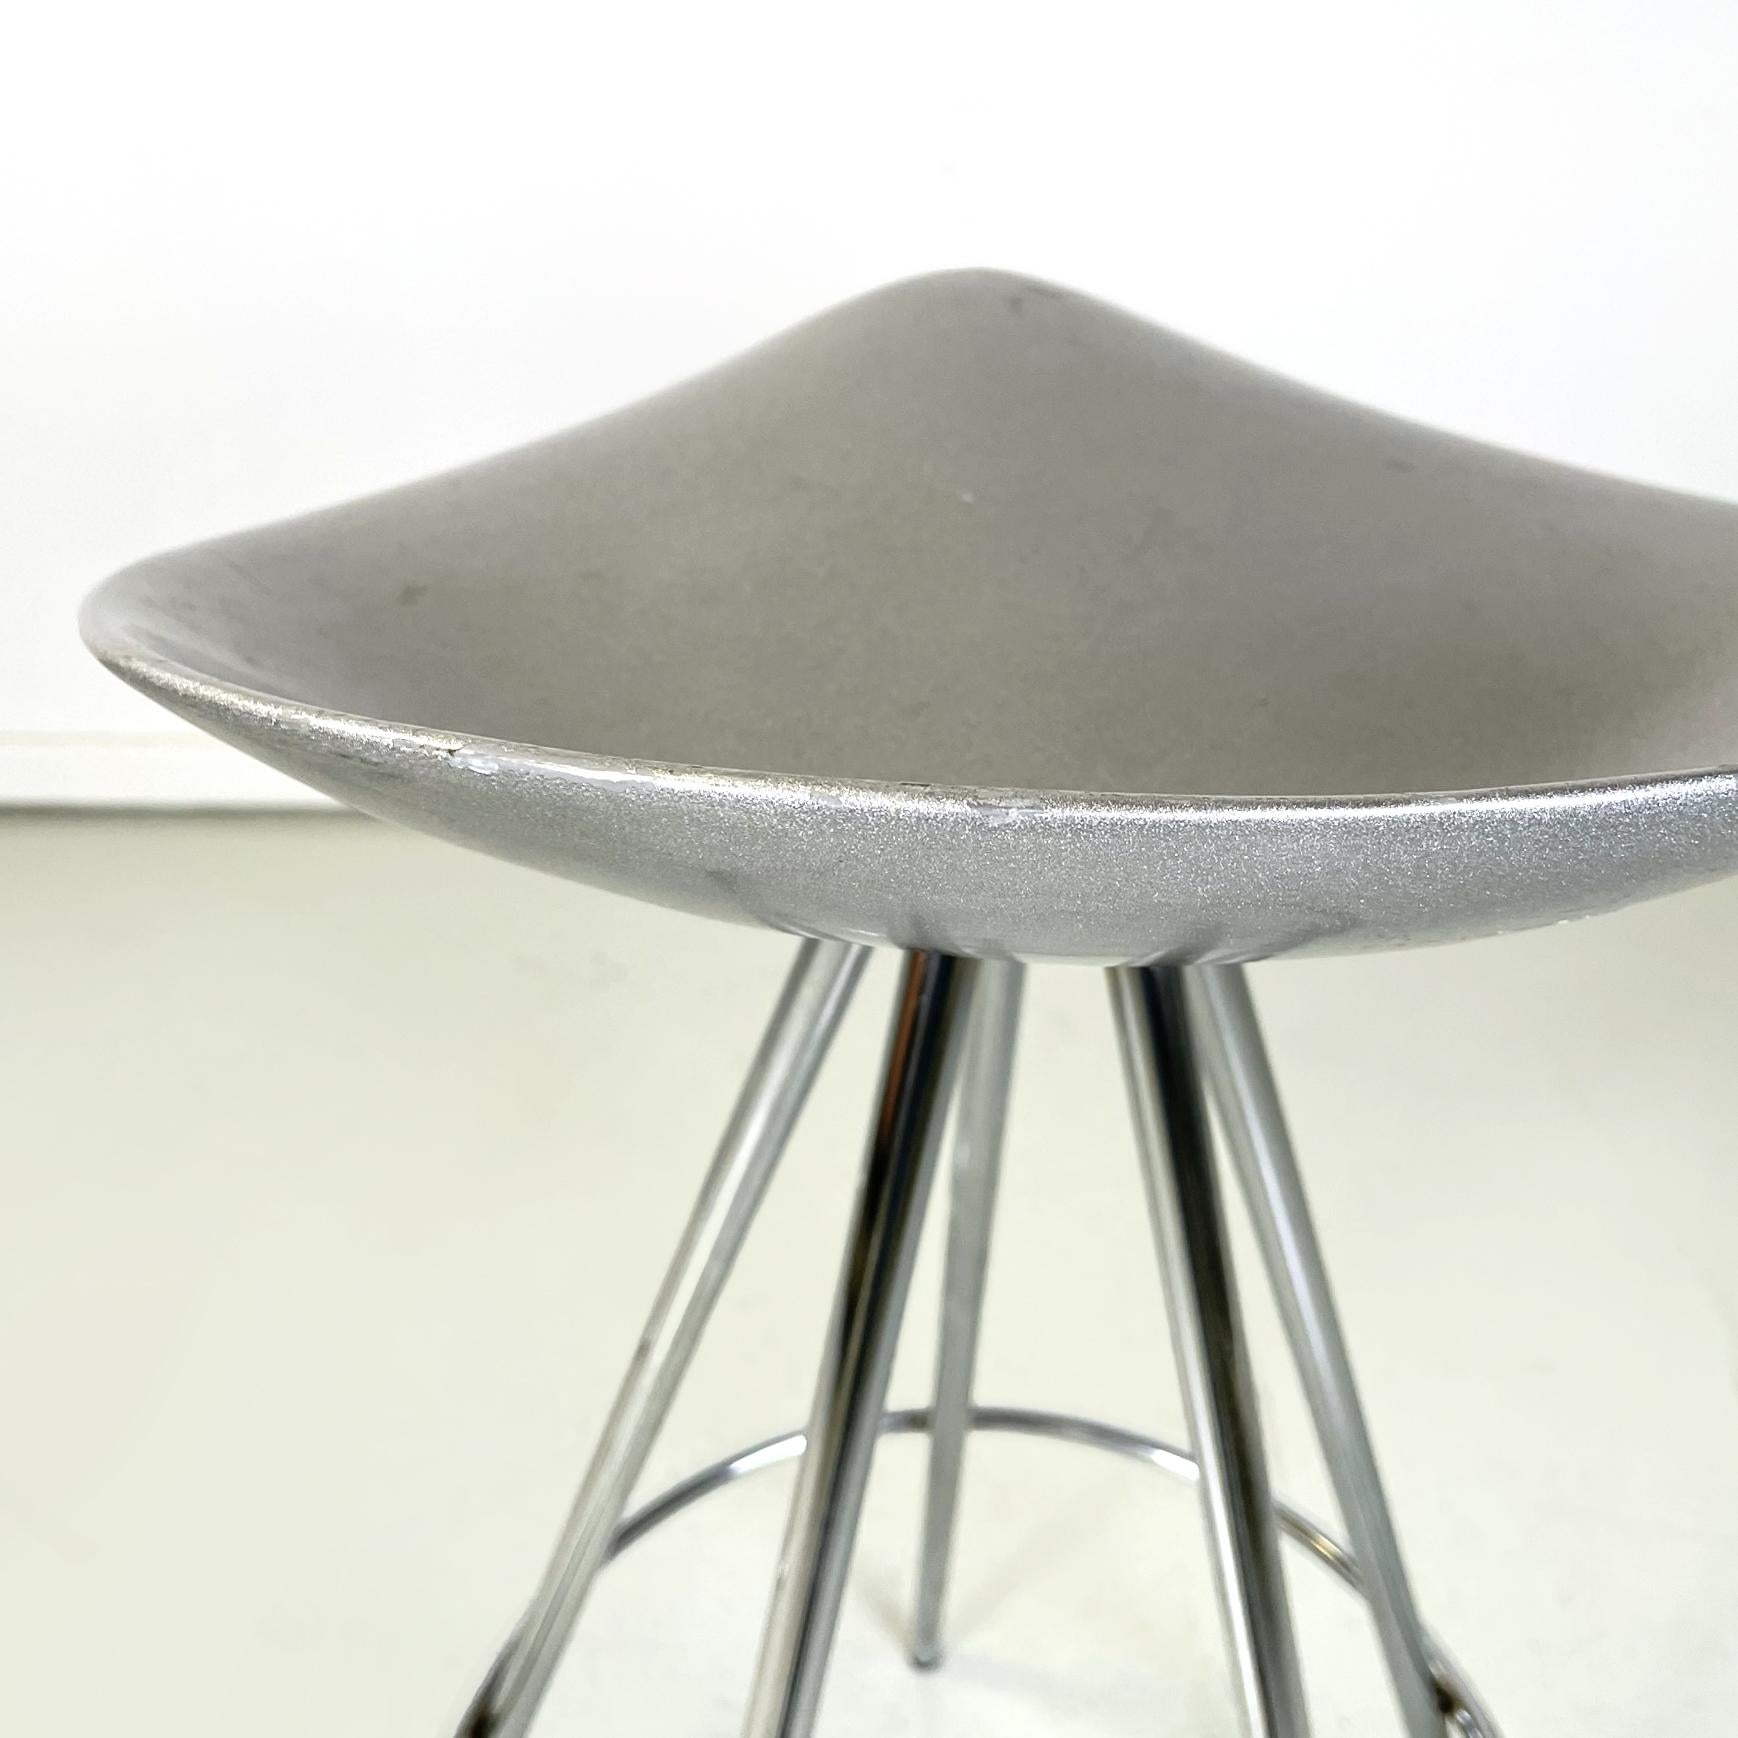 Spanish Post-Modern Bar Stools Jamaica by Pepe Cortés for Bd Barcellona, 2000s For Sale 5